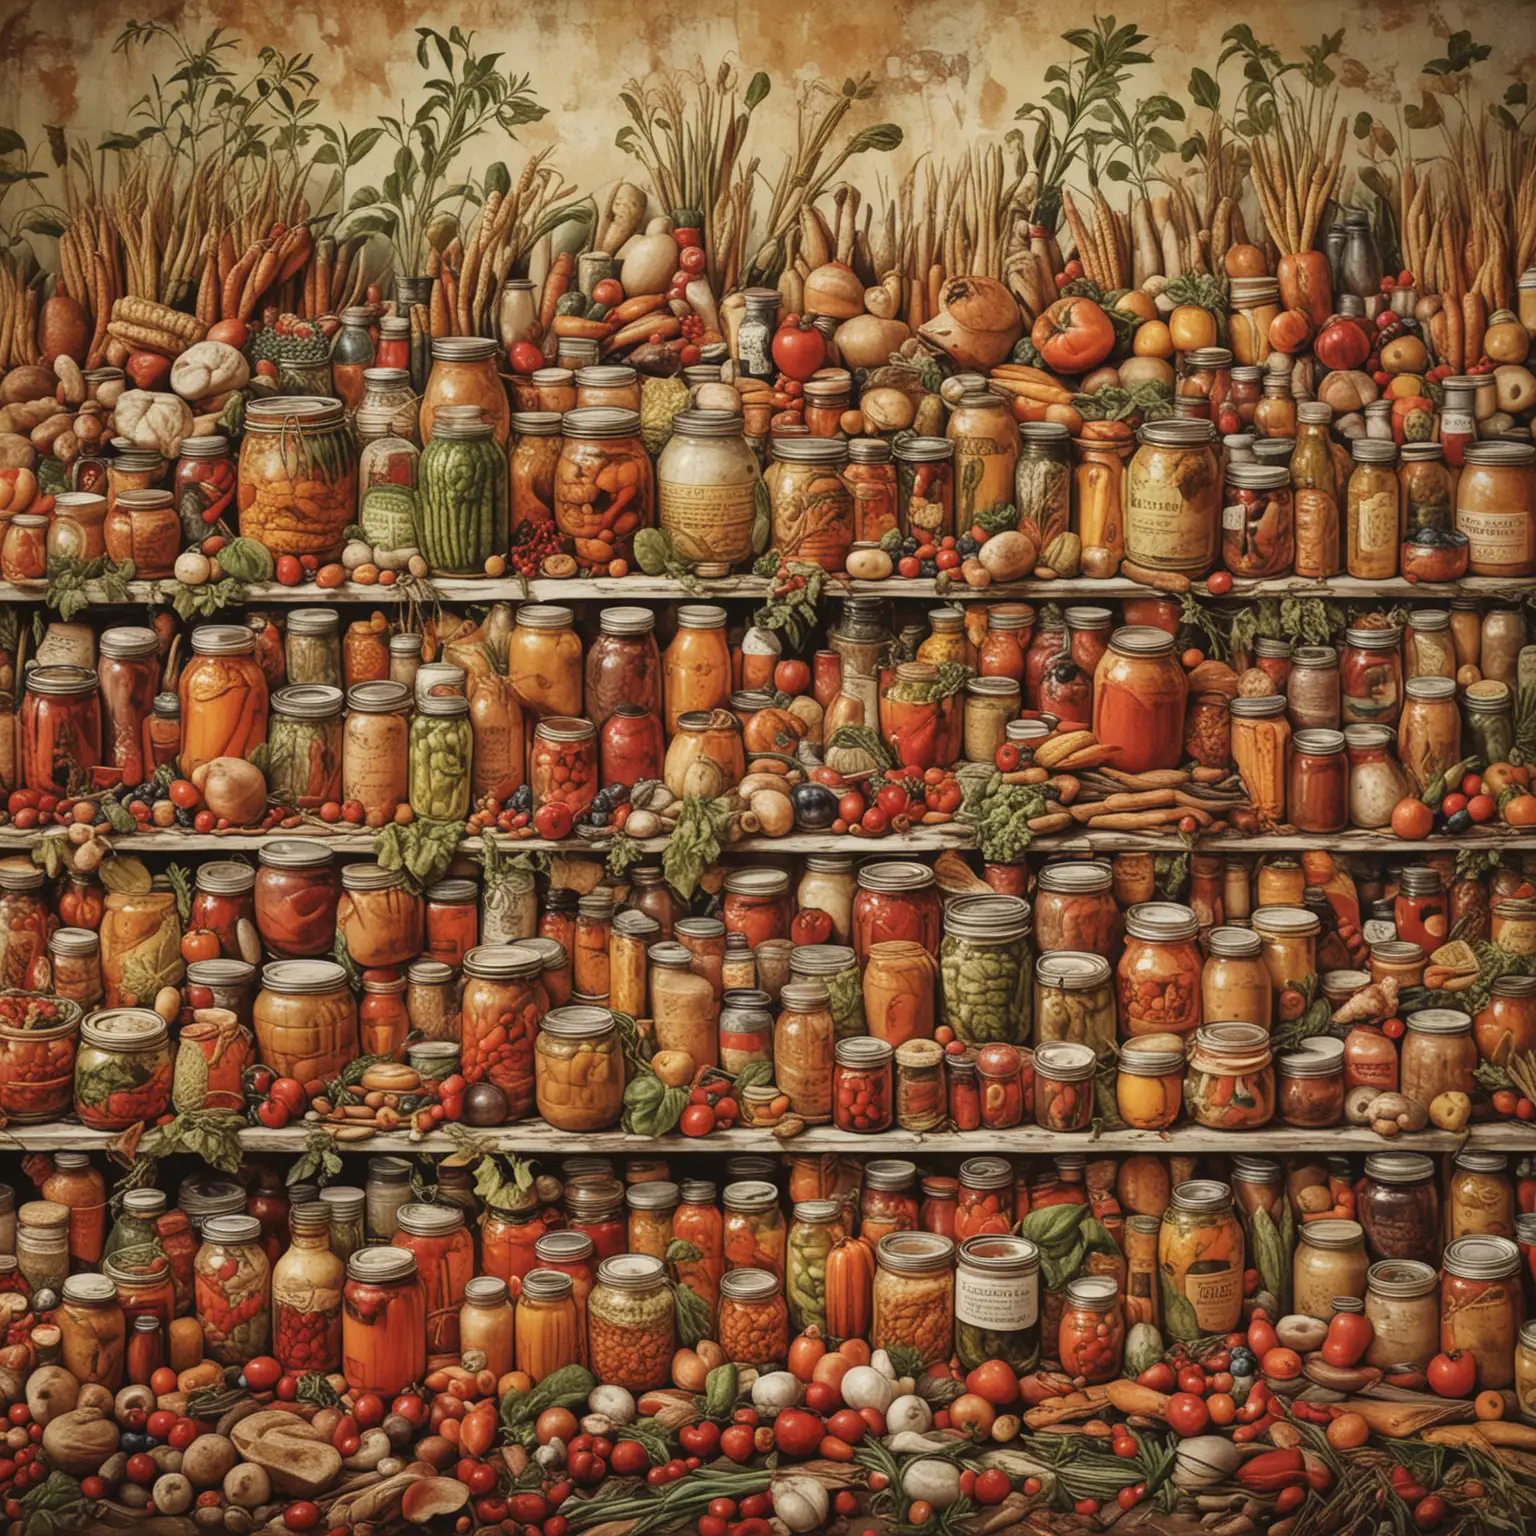 Cultural History of Food Preservation Art Traditional Techniques Depicted in Vibrant Imagery